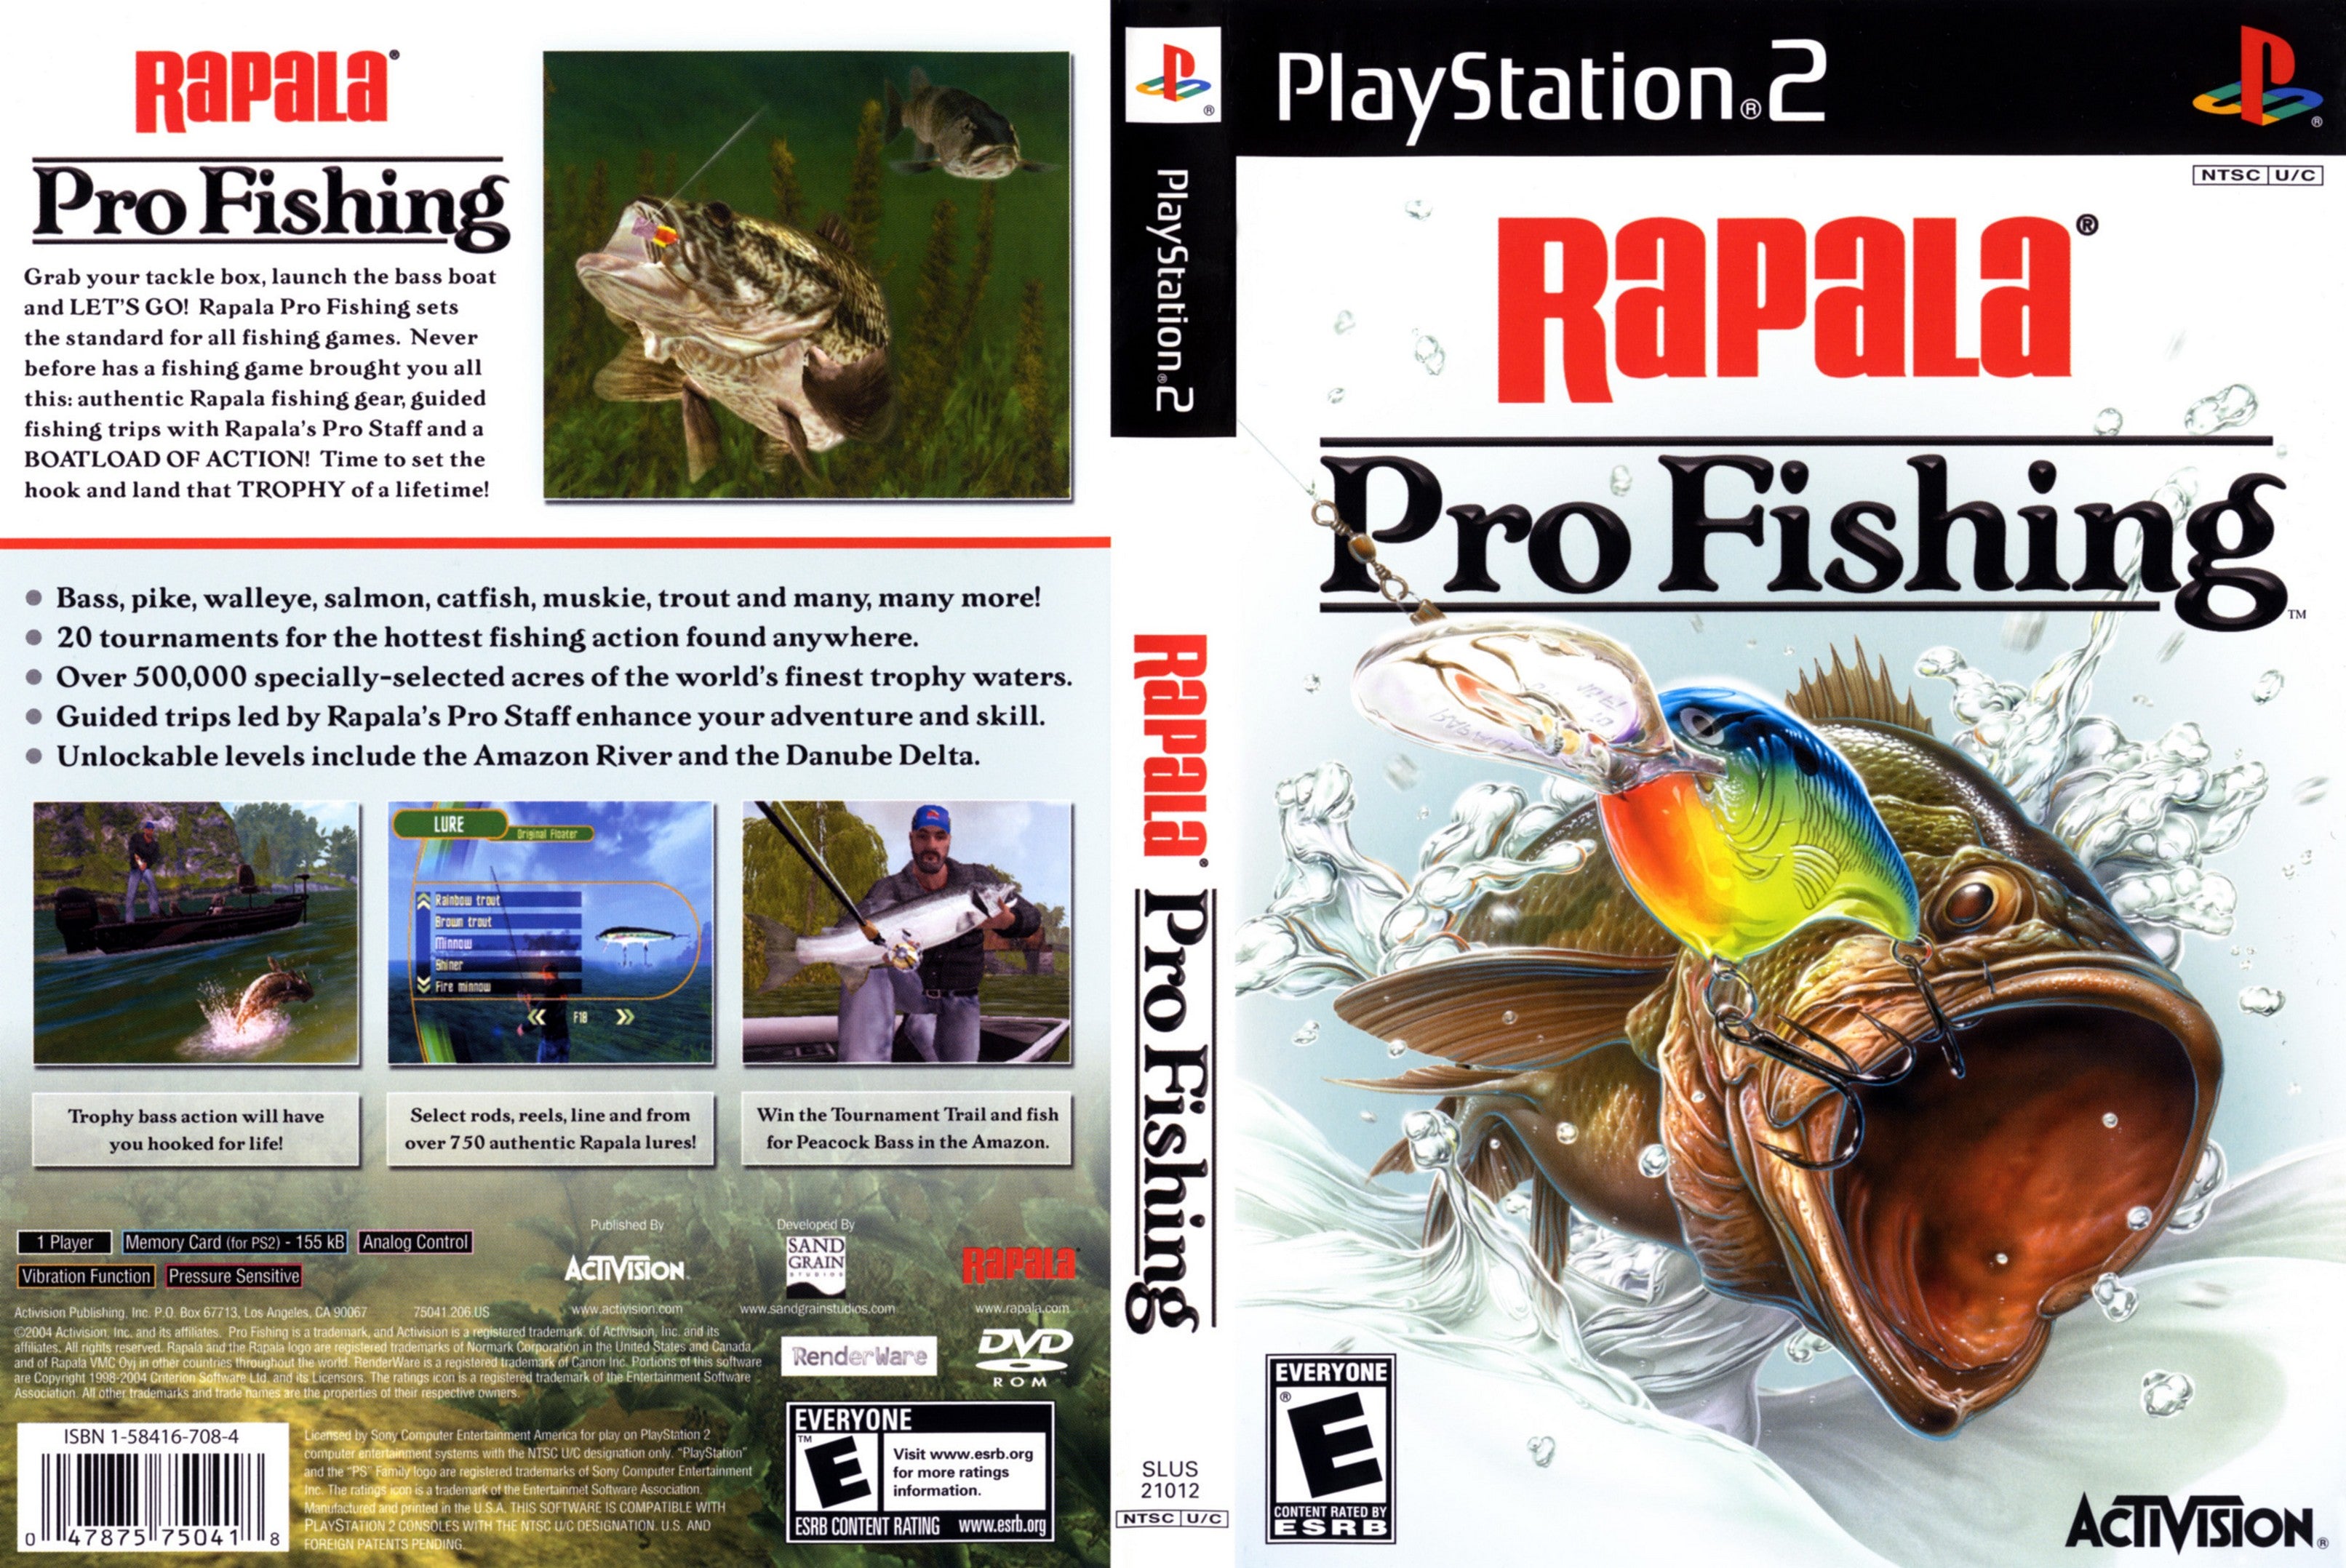 RAPALA PRO FISHING Sony PlayStation 2 PS2 Complete PAL Game with